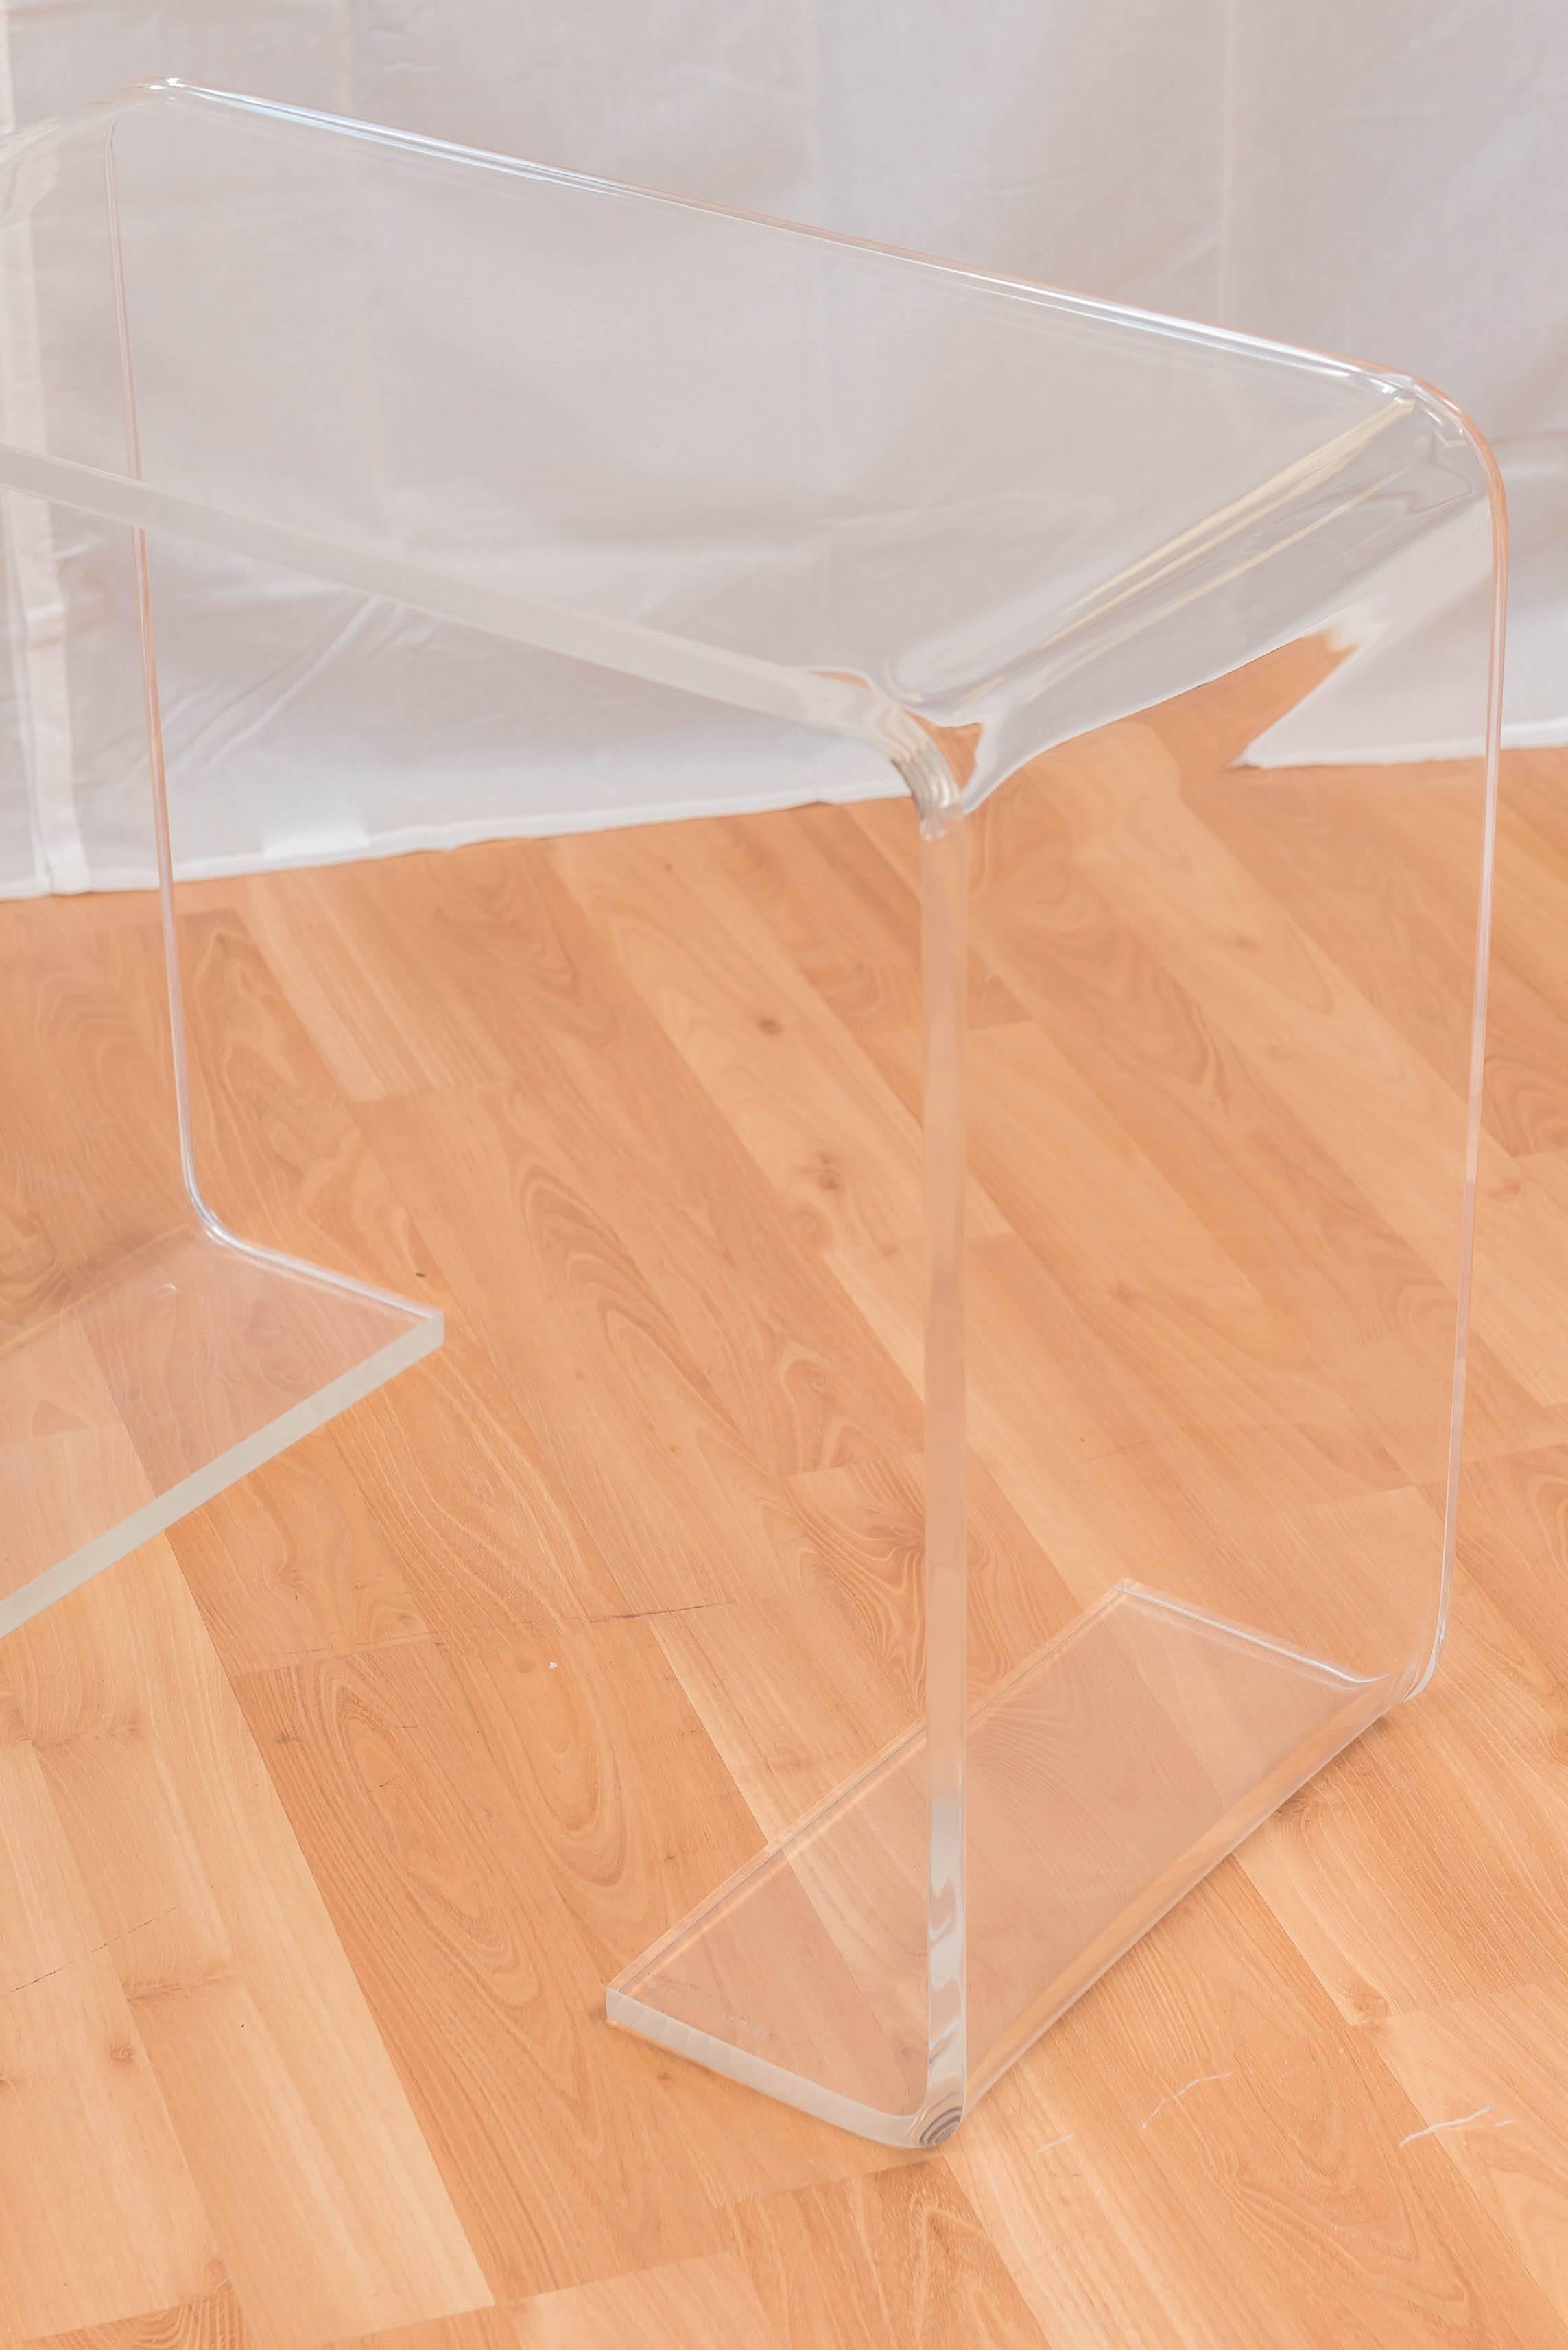 Stylish pair Les Prismatiques lucite end tables with waterfall edges, stamped on bottom lip. 